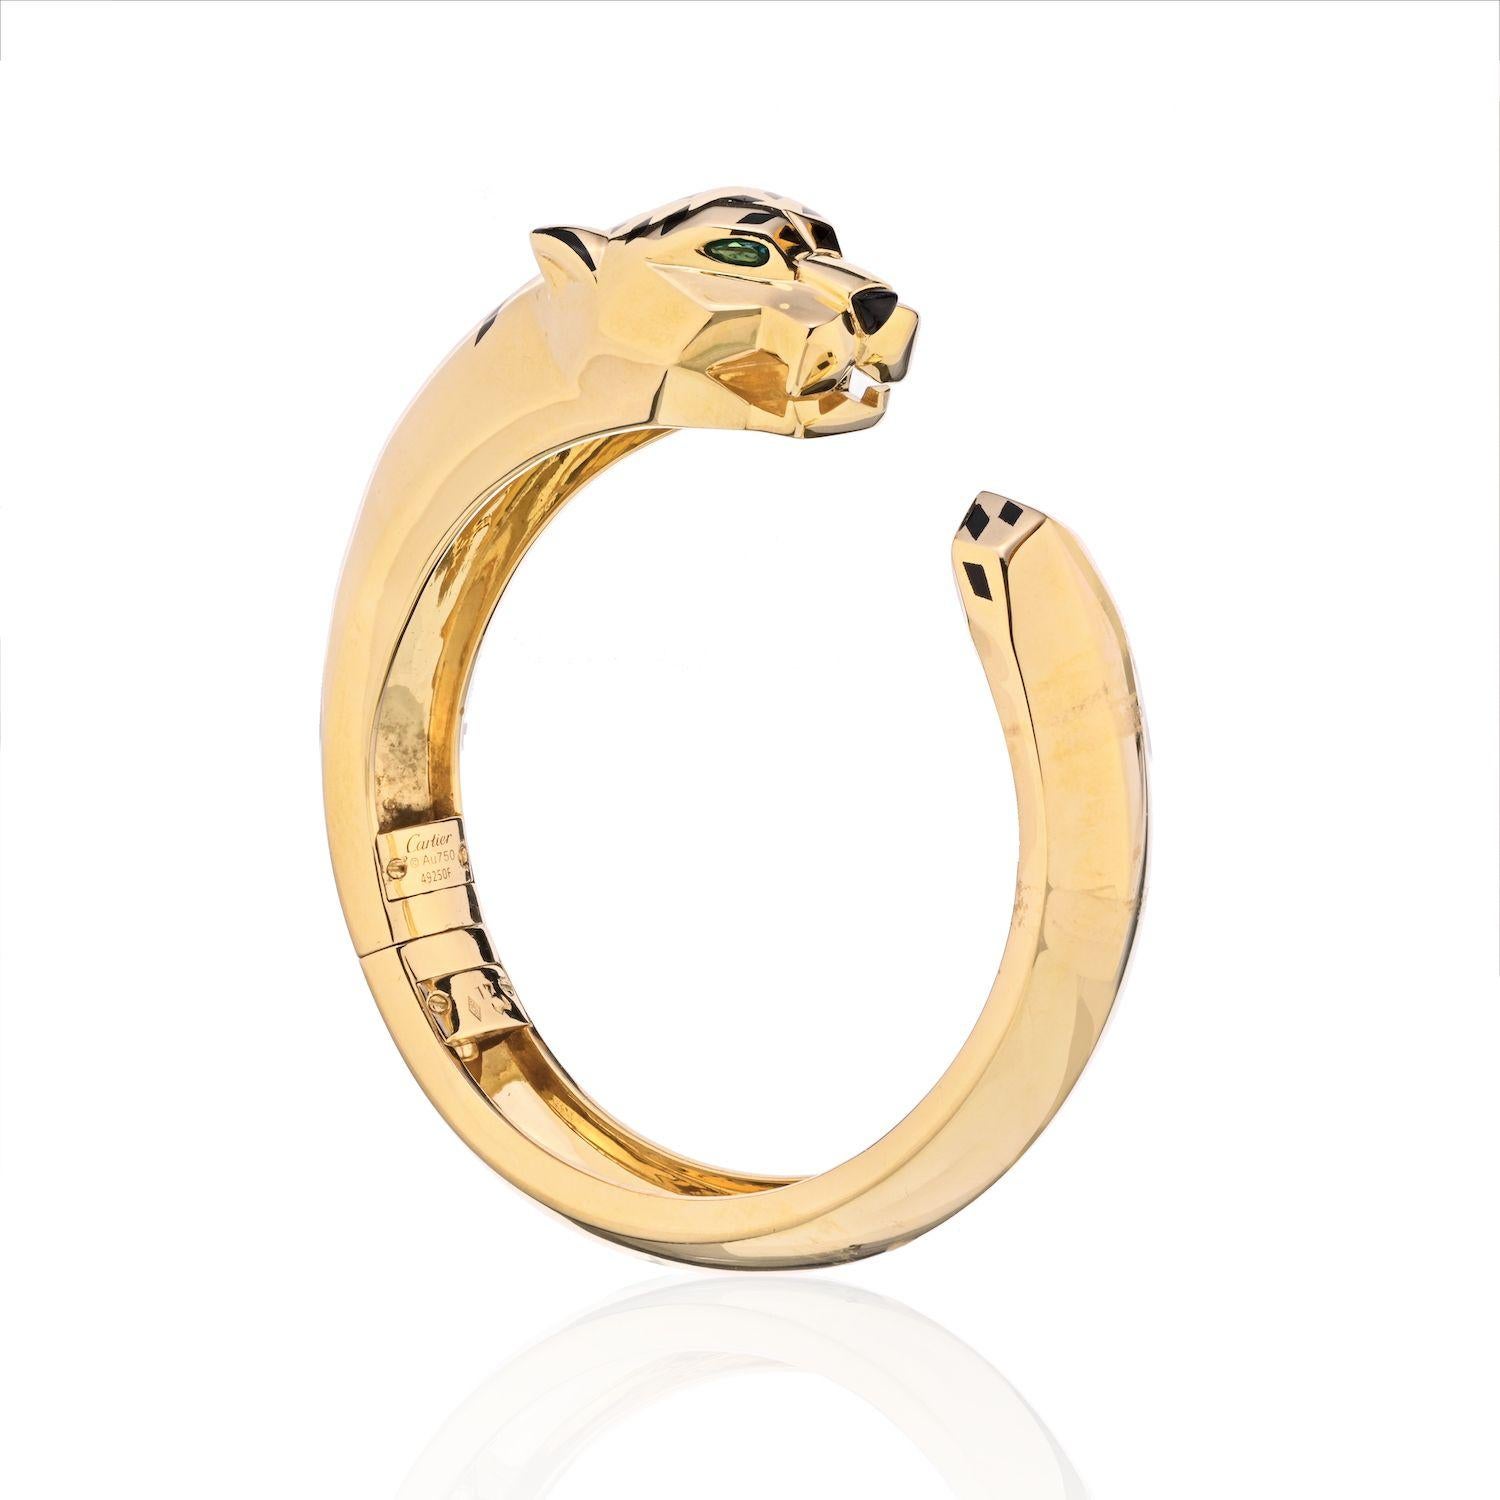 Cartier 18K Yellow Gold Panthere Size 17 Bangle Bracelet.
A hinged Cartier 'Panthere' bangle in 18k gold, culminating in a sculpted panther head set with peridot eyes, an onyx nose & finished with black lacquer spots.
Detailing and one-of-a-kind